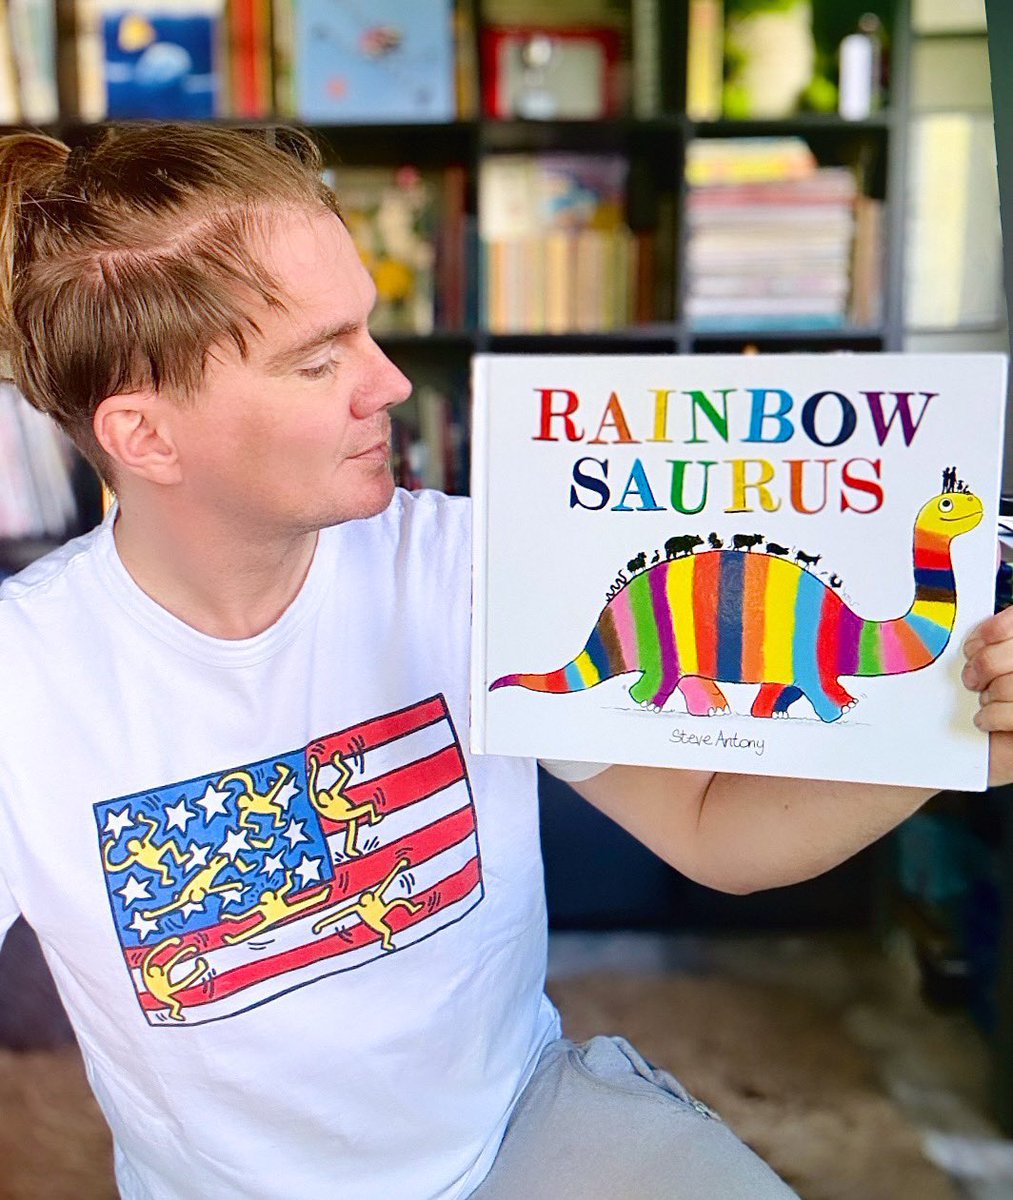 Only 1 USA school has responded to my invitation to take part in my USA libraries virtual tour of Rainbowsaurus (via my socials). I guess it’s going to be a short tour! Don’t know why I’m finding it so hard to reach my US readers 🙃 #picturebooks